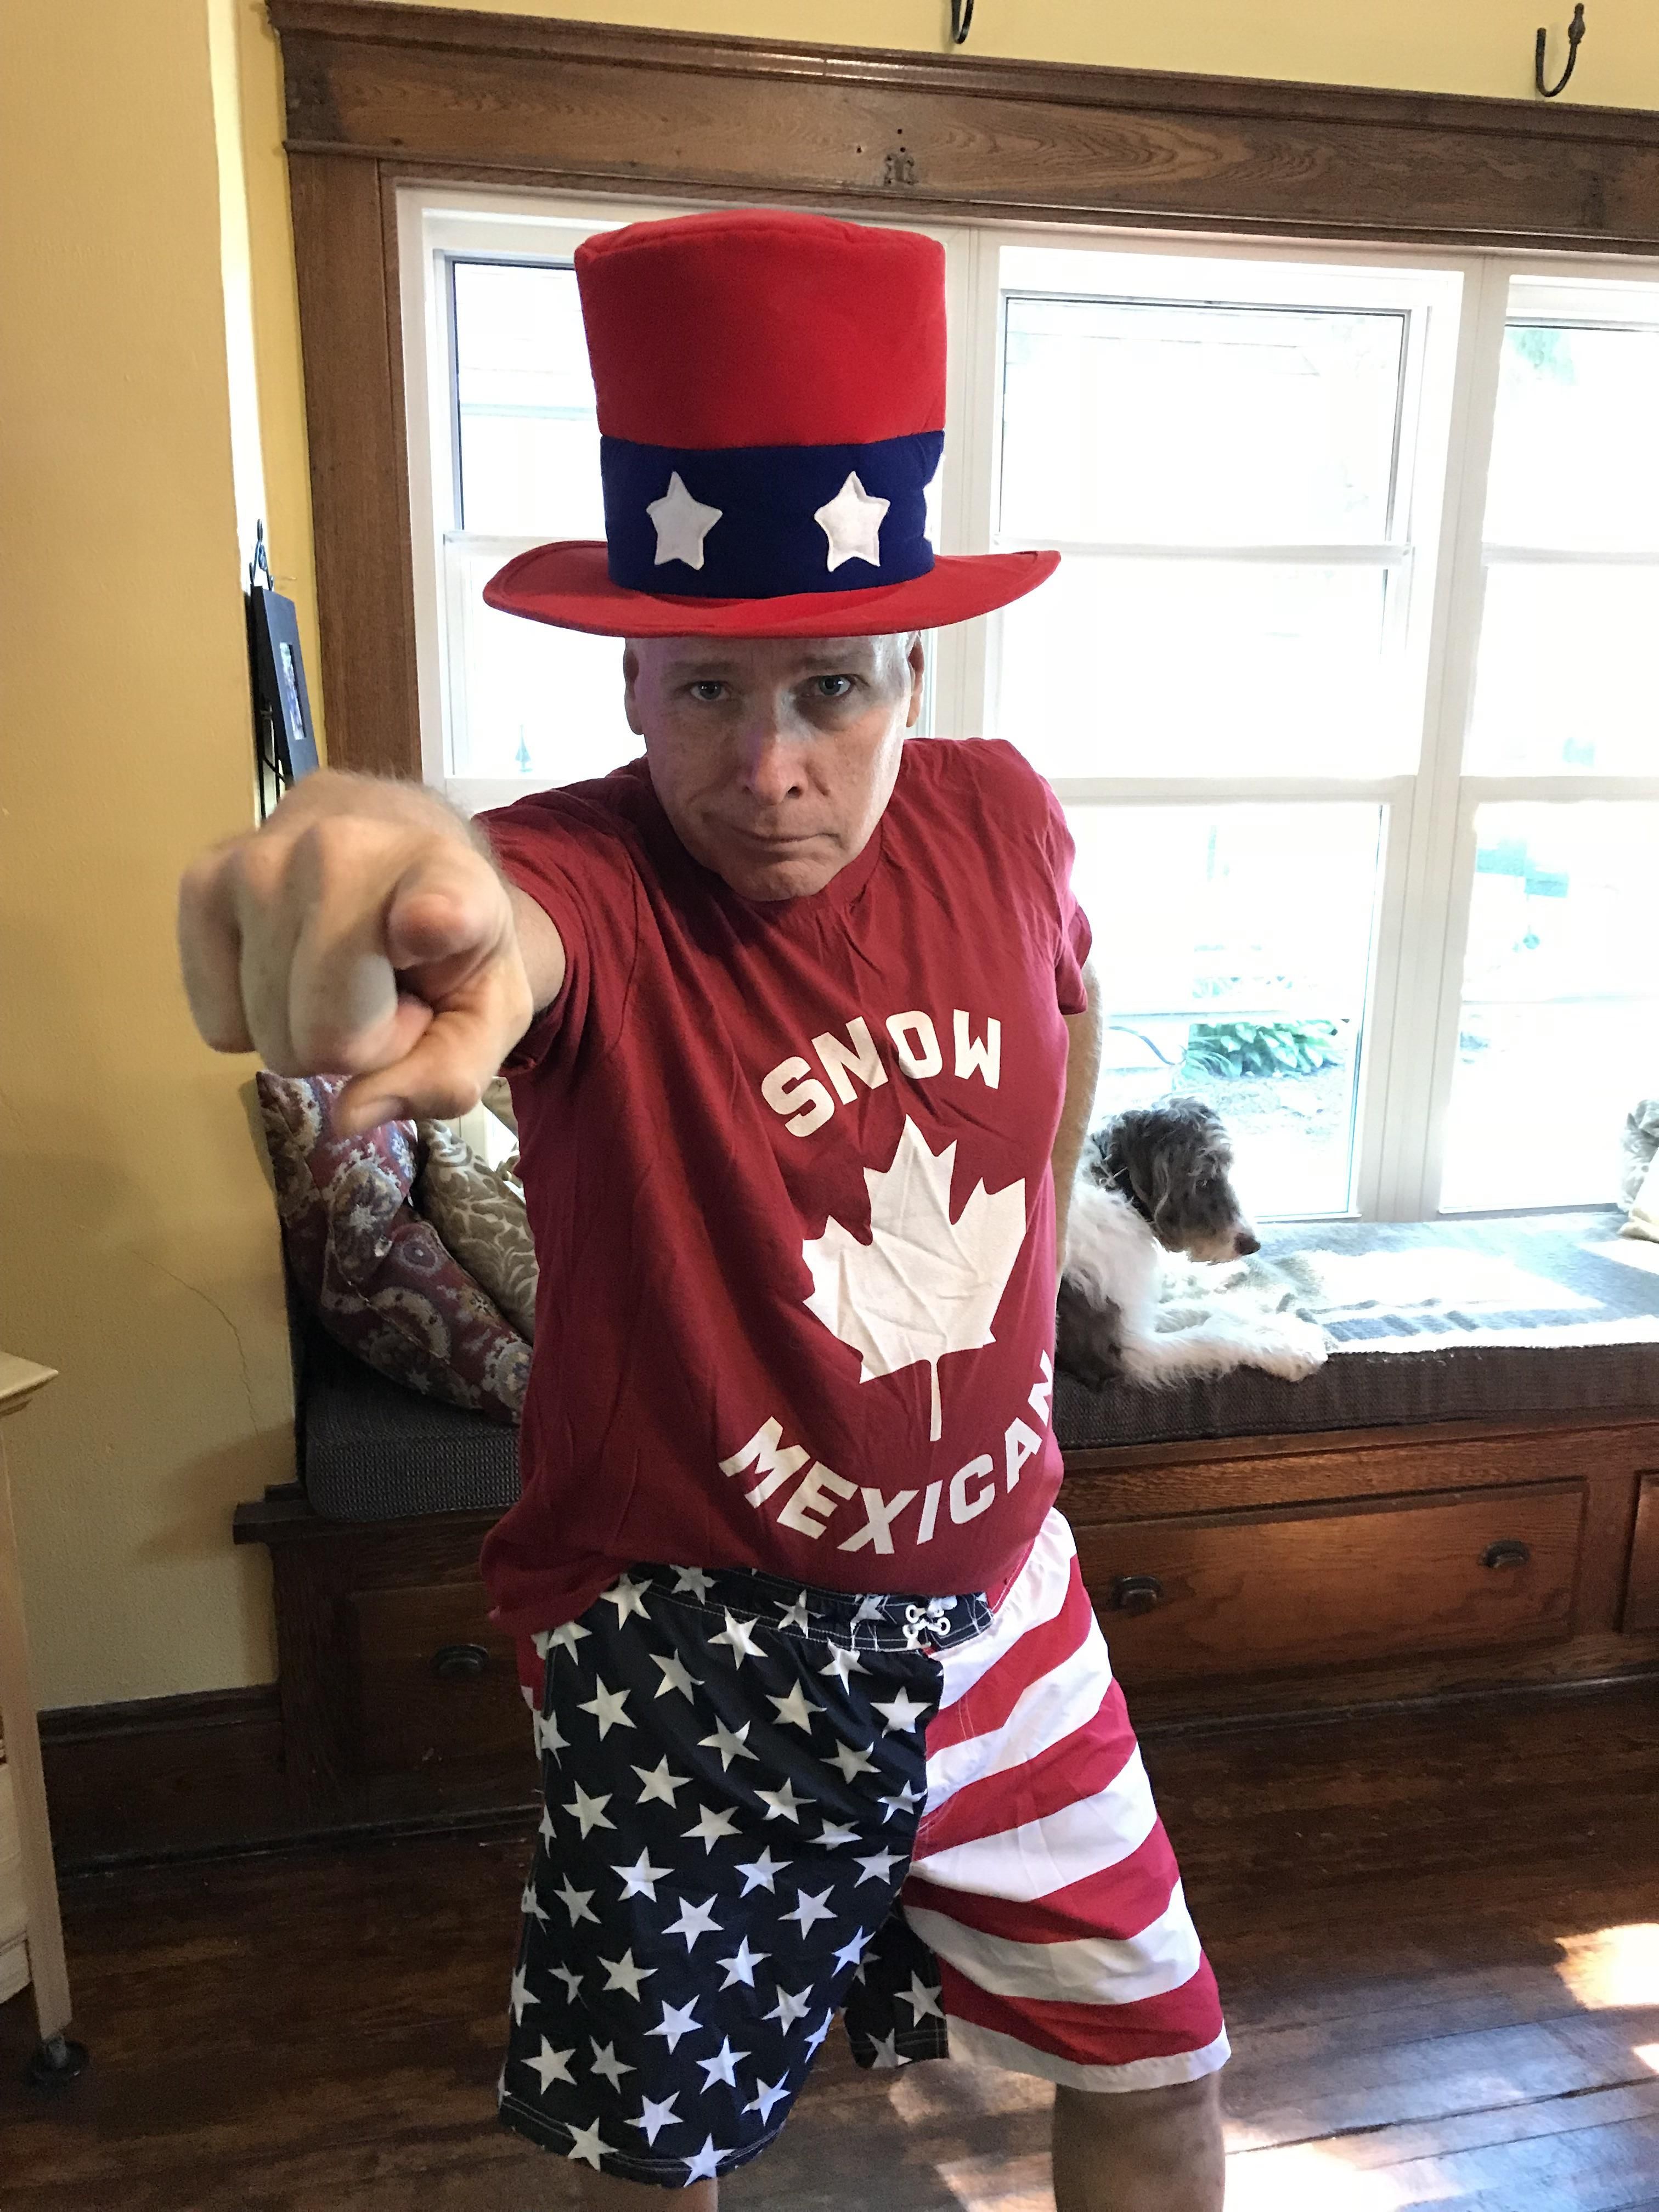 My Dad is a Canadian expat. Today he’s throwing his first 4th of July party as an American citizen.